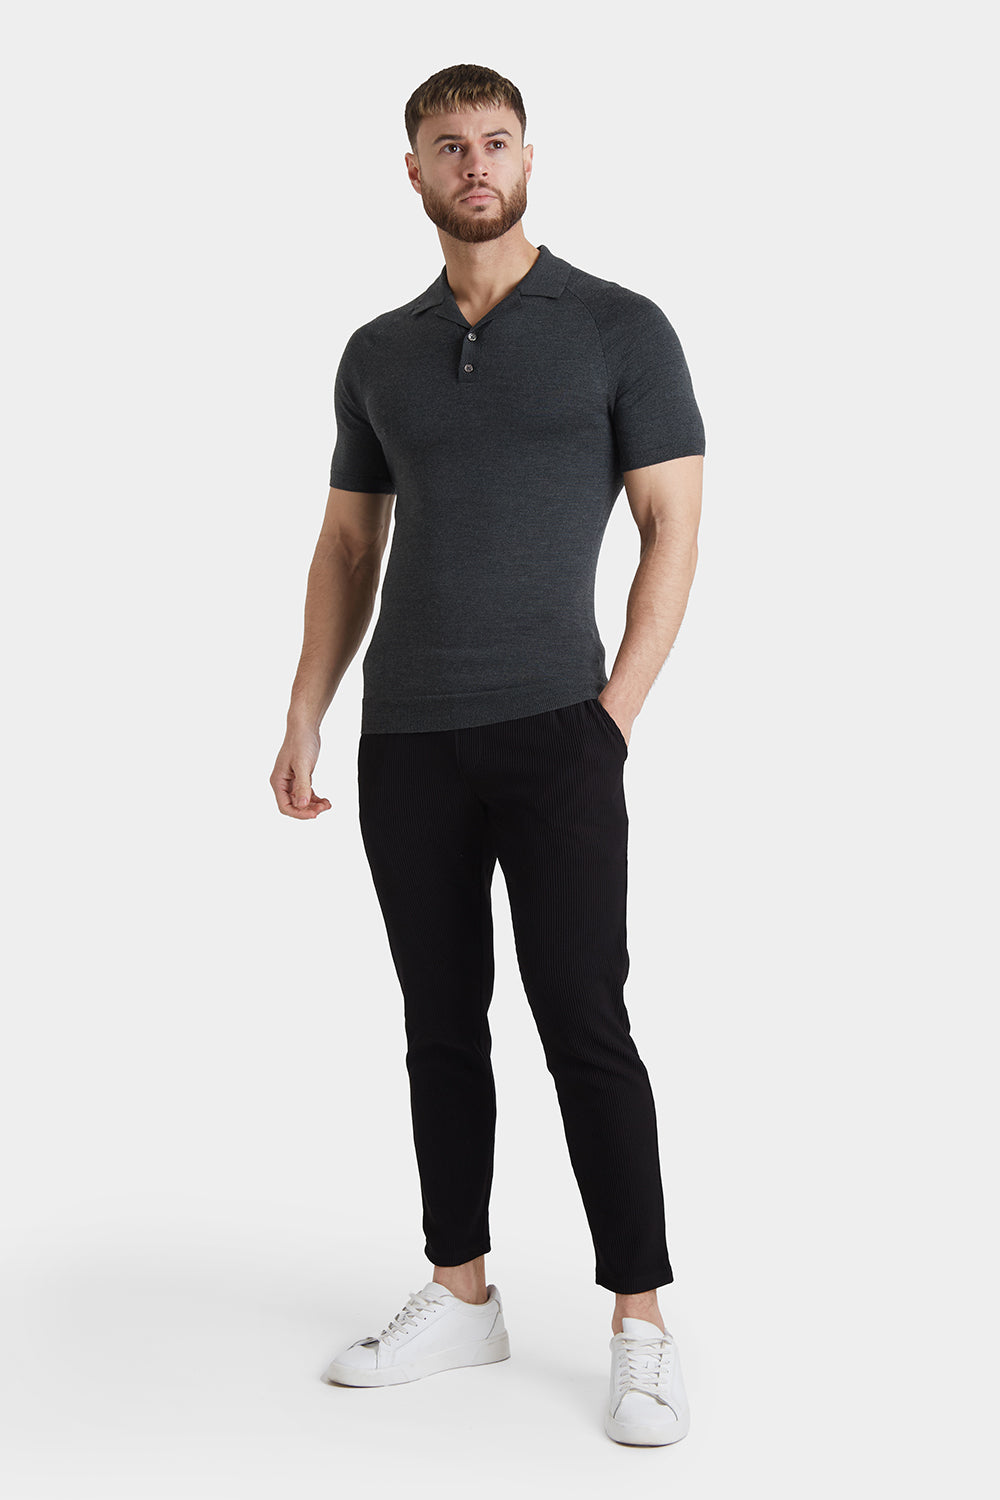 Textured Trouser in Black - TAILORED ATHLETE - ROW